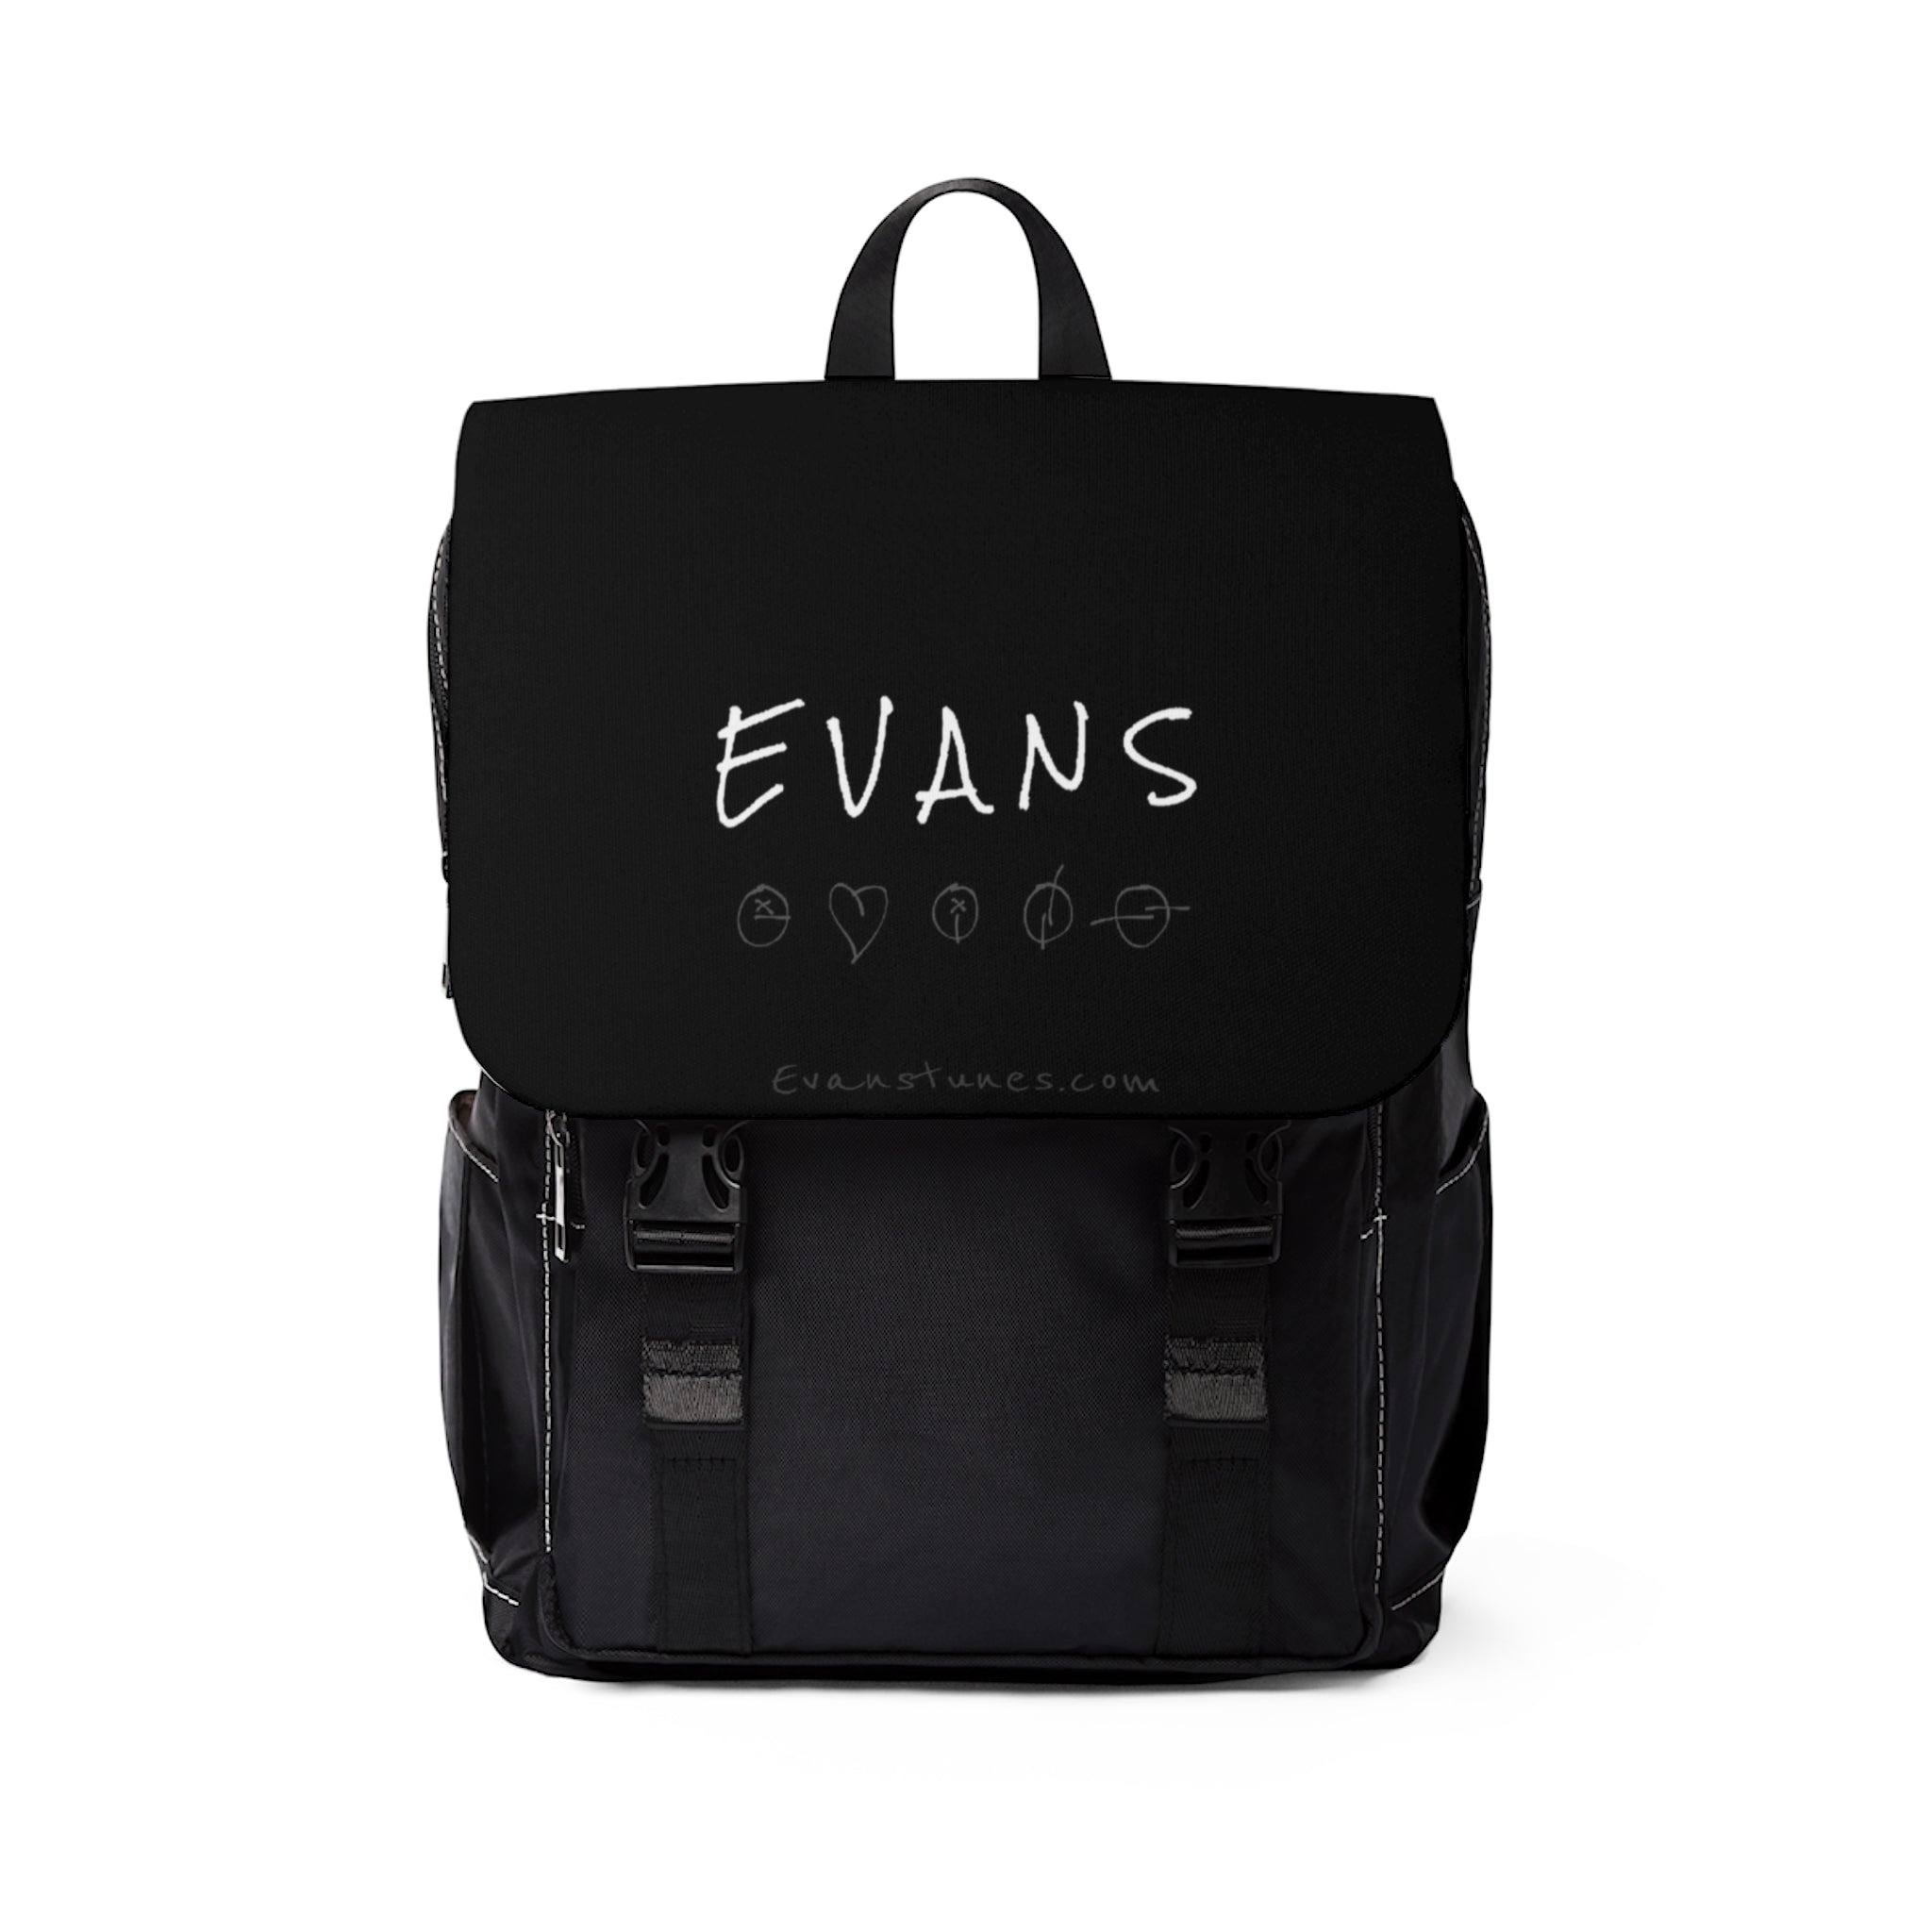 EVANS -Love conquers it all -Unisex Casual Shoulder Backpack